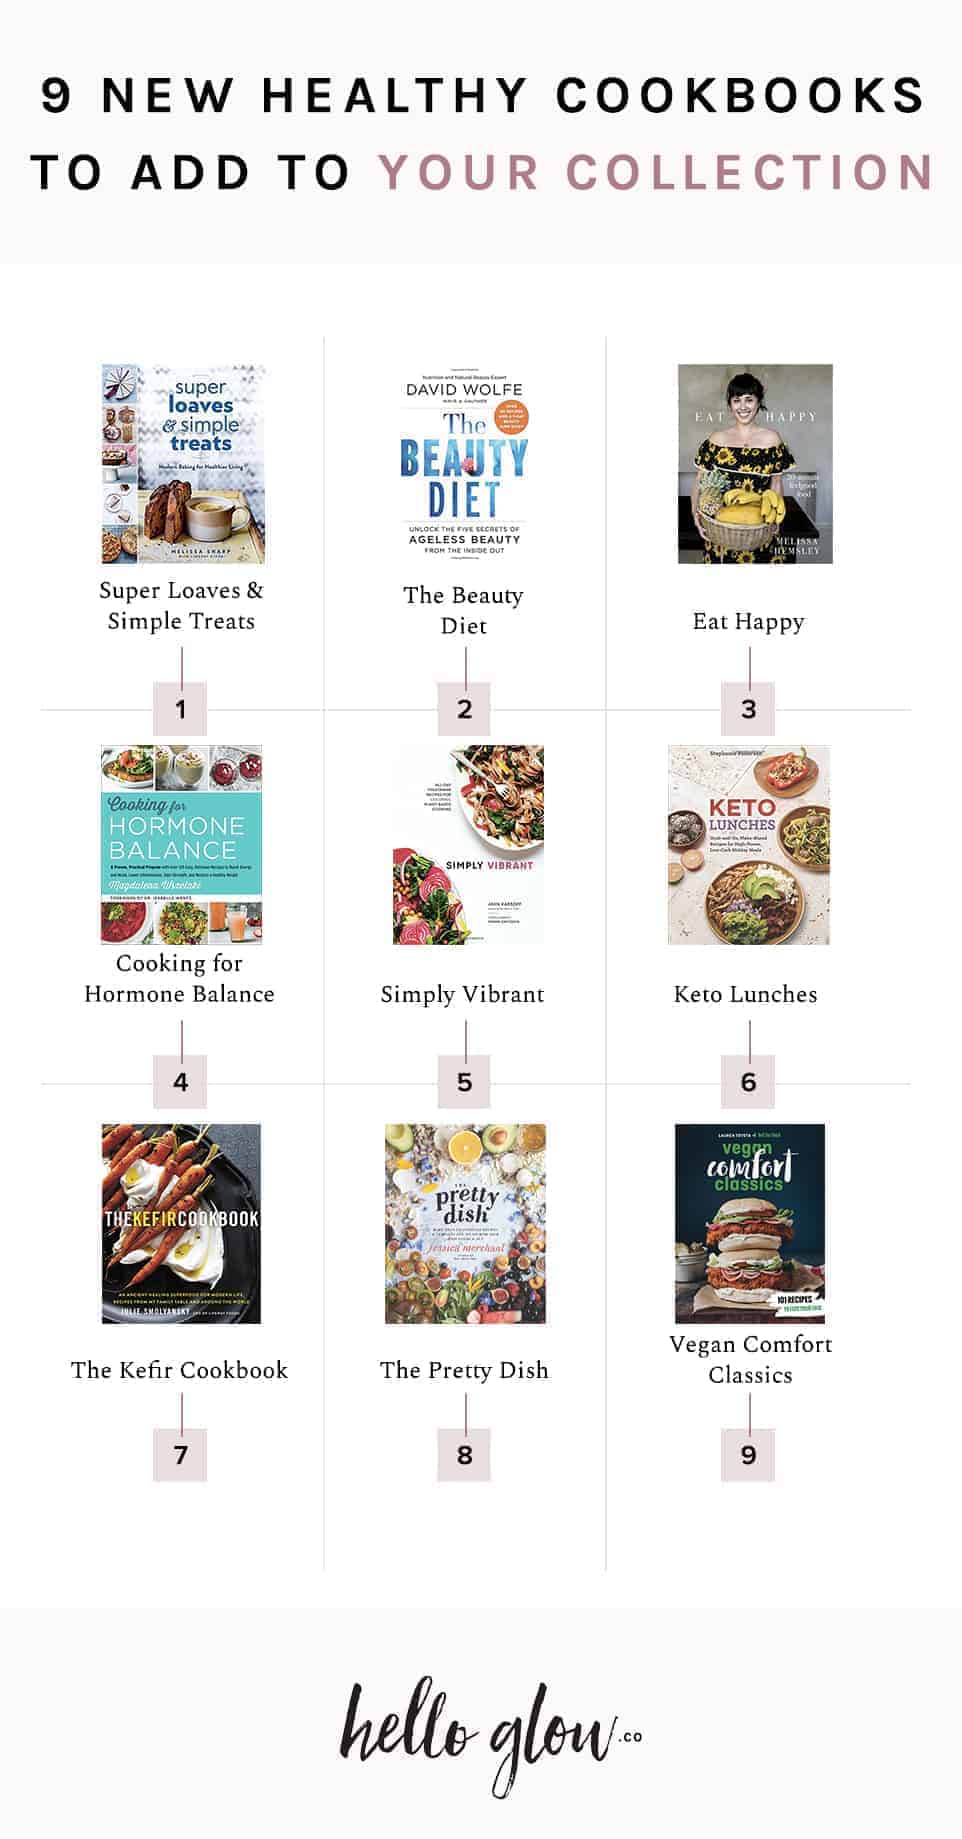 9 New Healthy Cookbooks to Add to Your Collection | Hello Glow